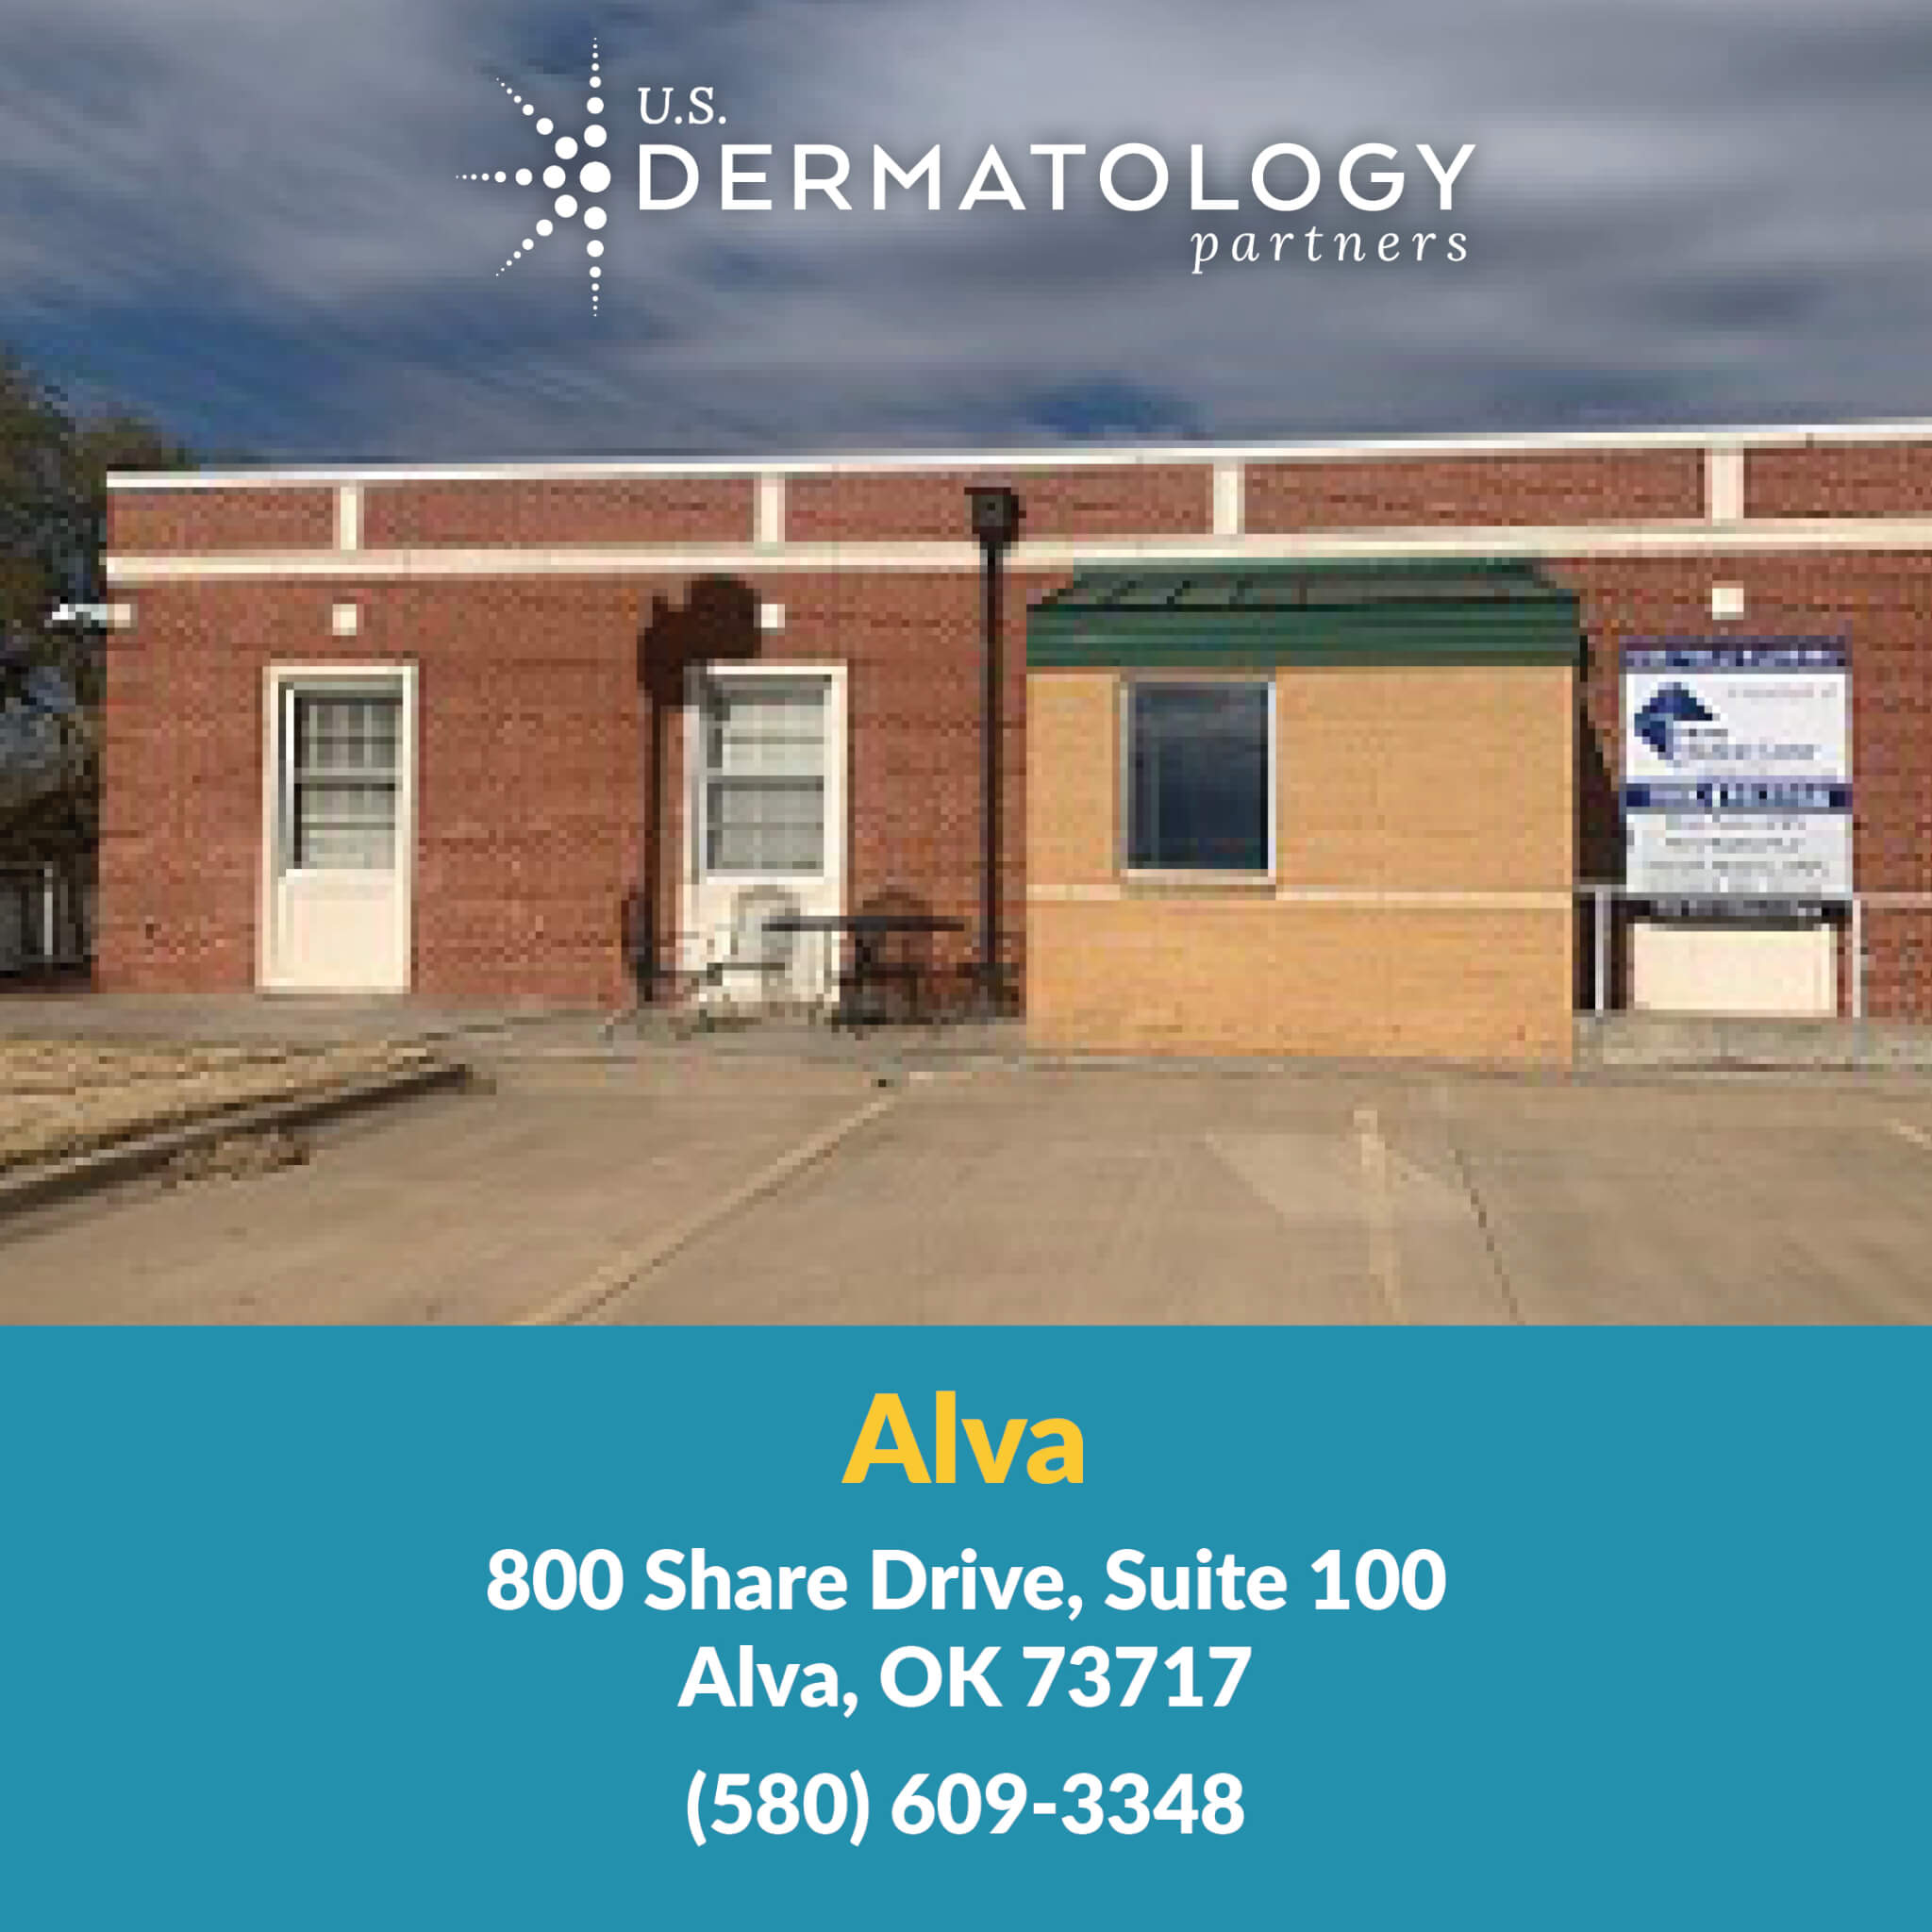 U.S. Dermatology Partners is your specialty dermatologist in Alva, Oklahoma. We offer treatment for acne, eczema, skin cancer, & more.